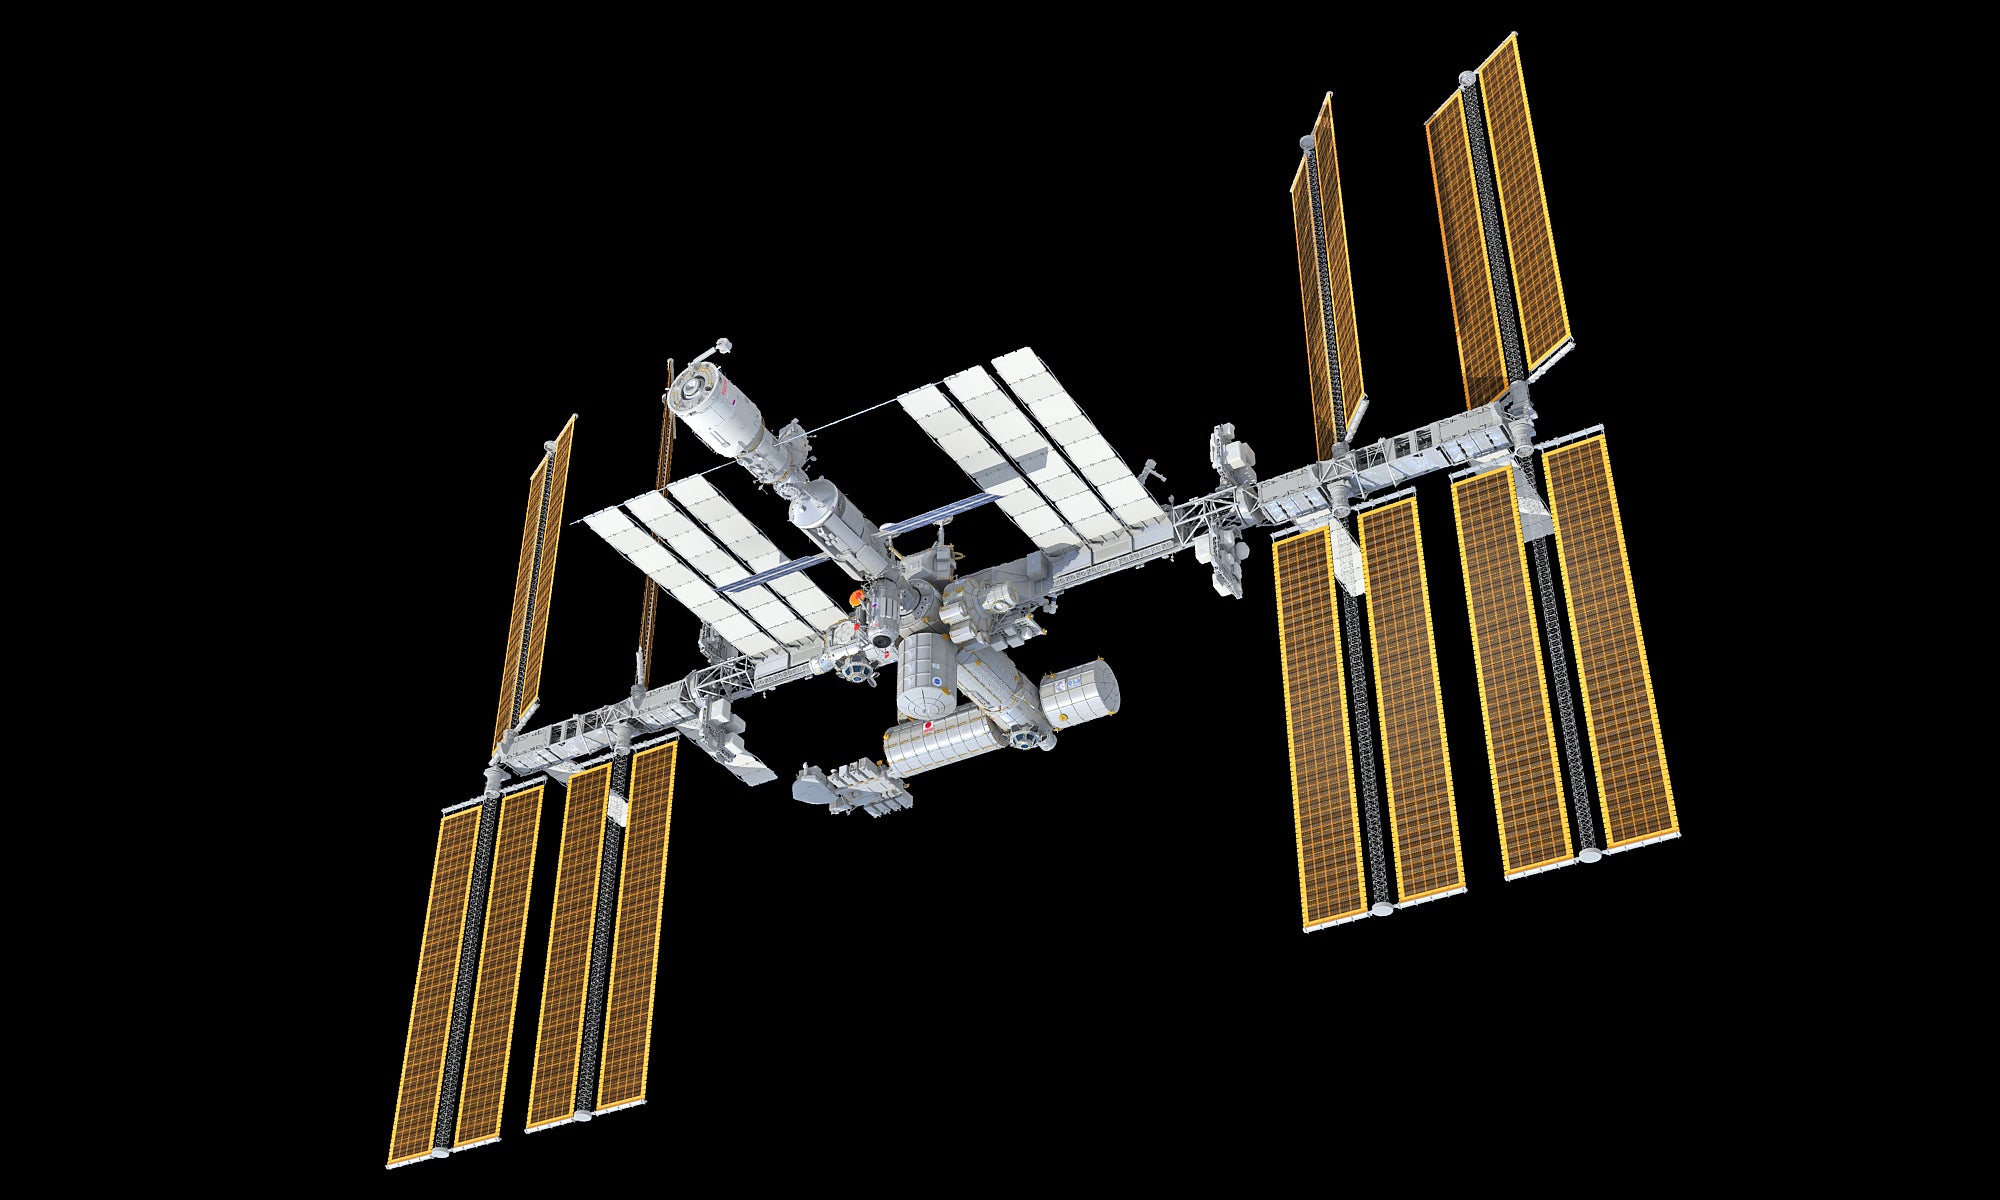 3D ISS International Space Station model